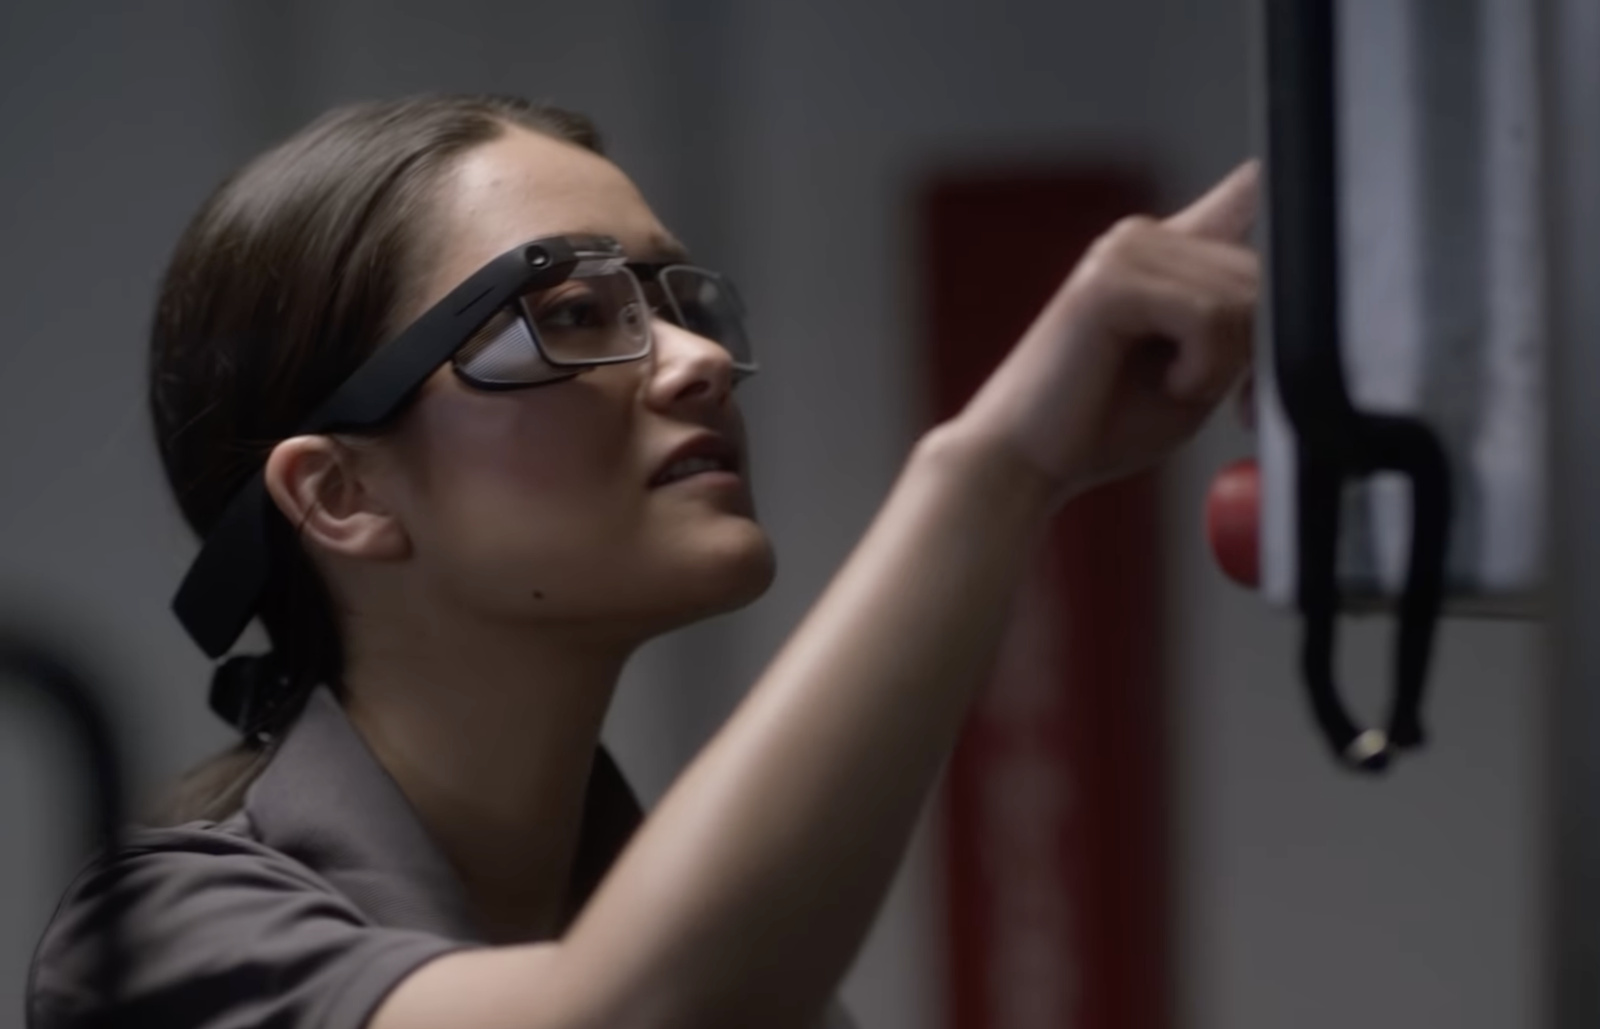 Google Glass is set to disappear (again)